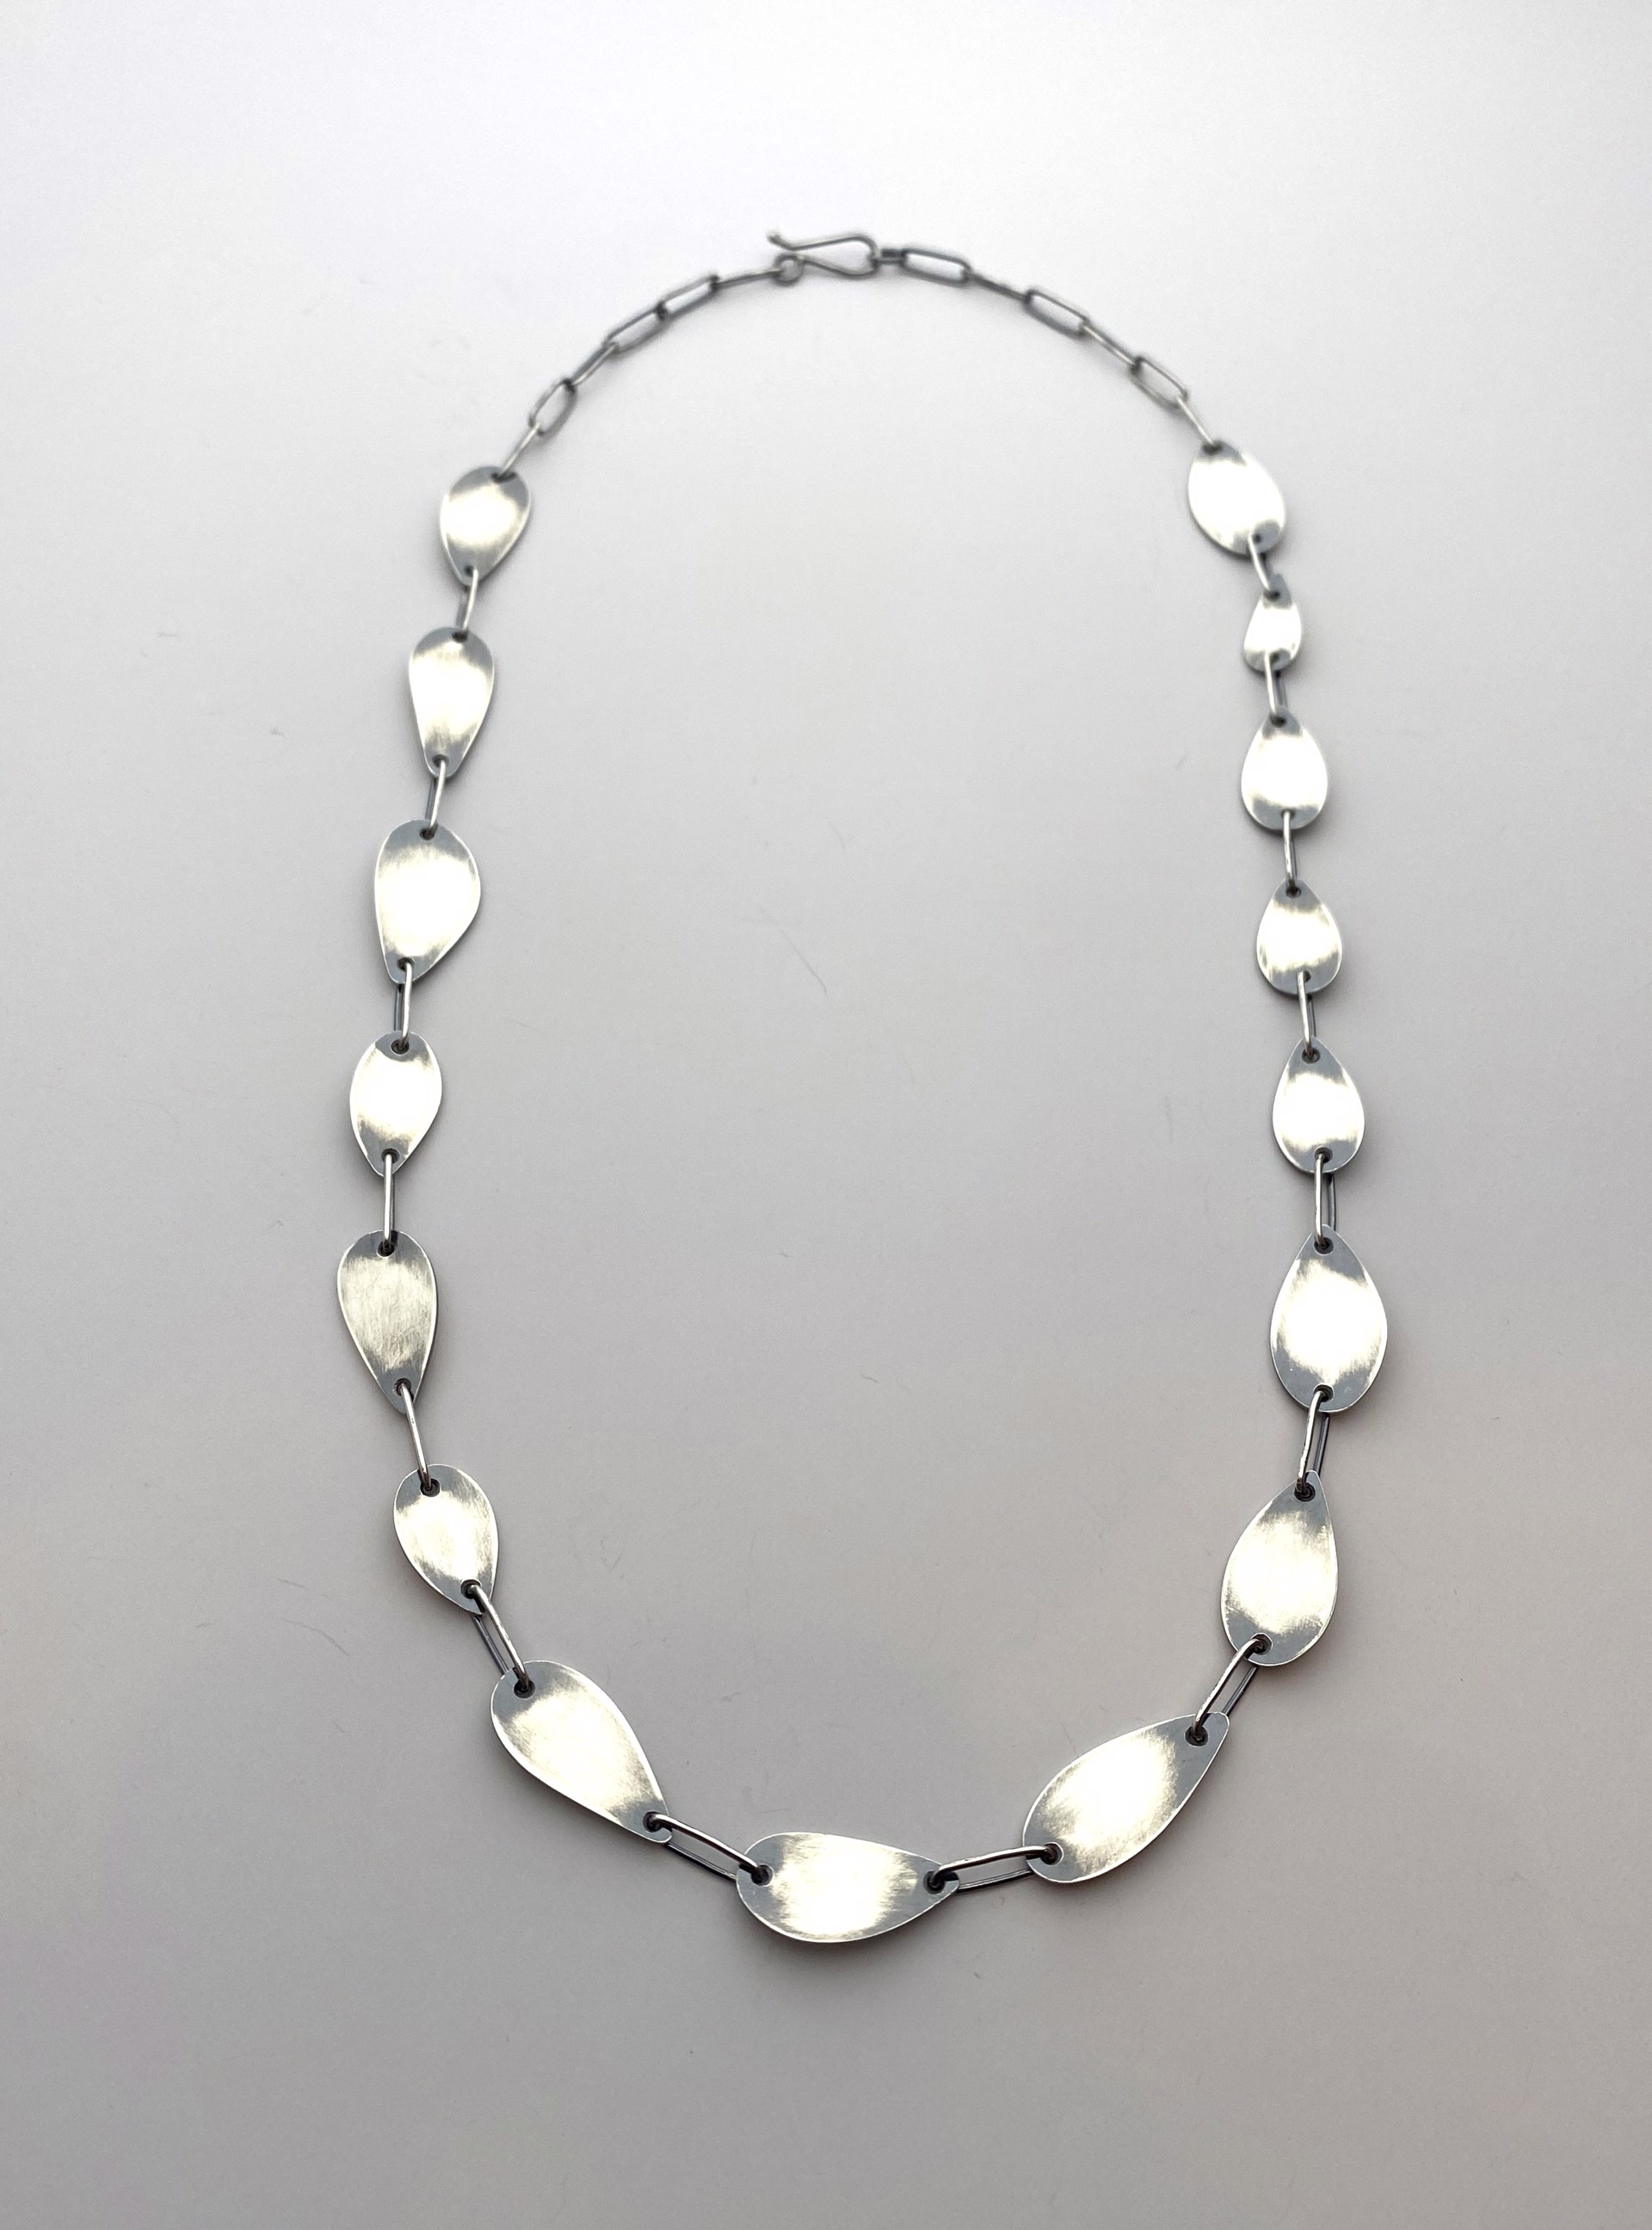 S Leaf Chain (necklace) by Tabitha Ott